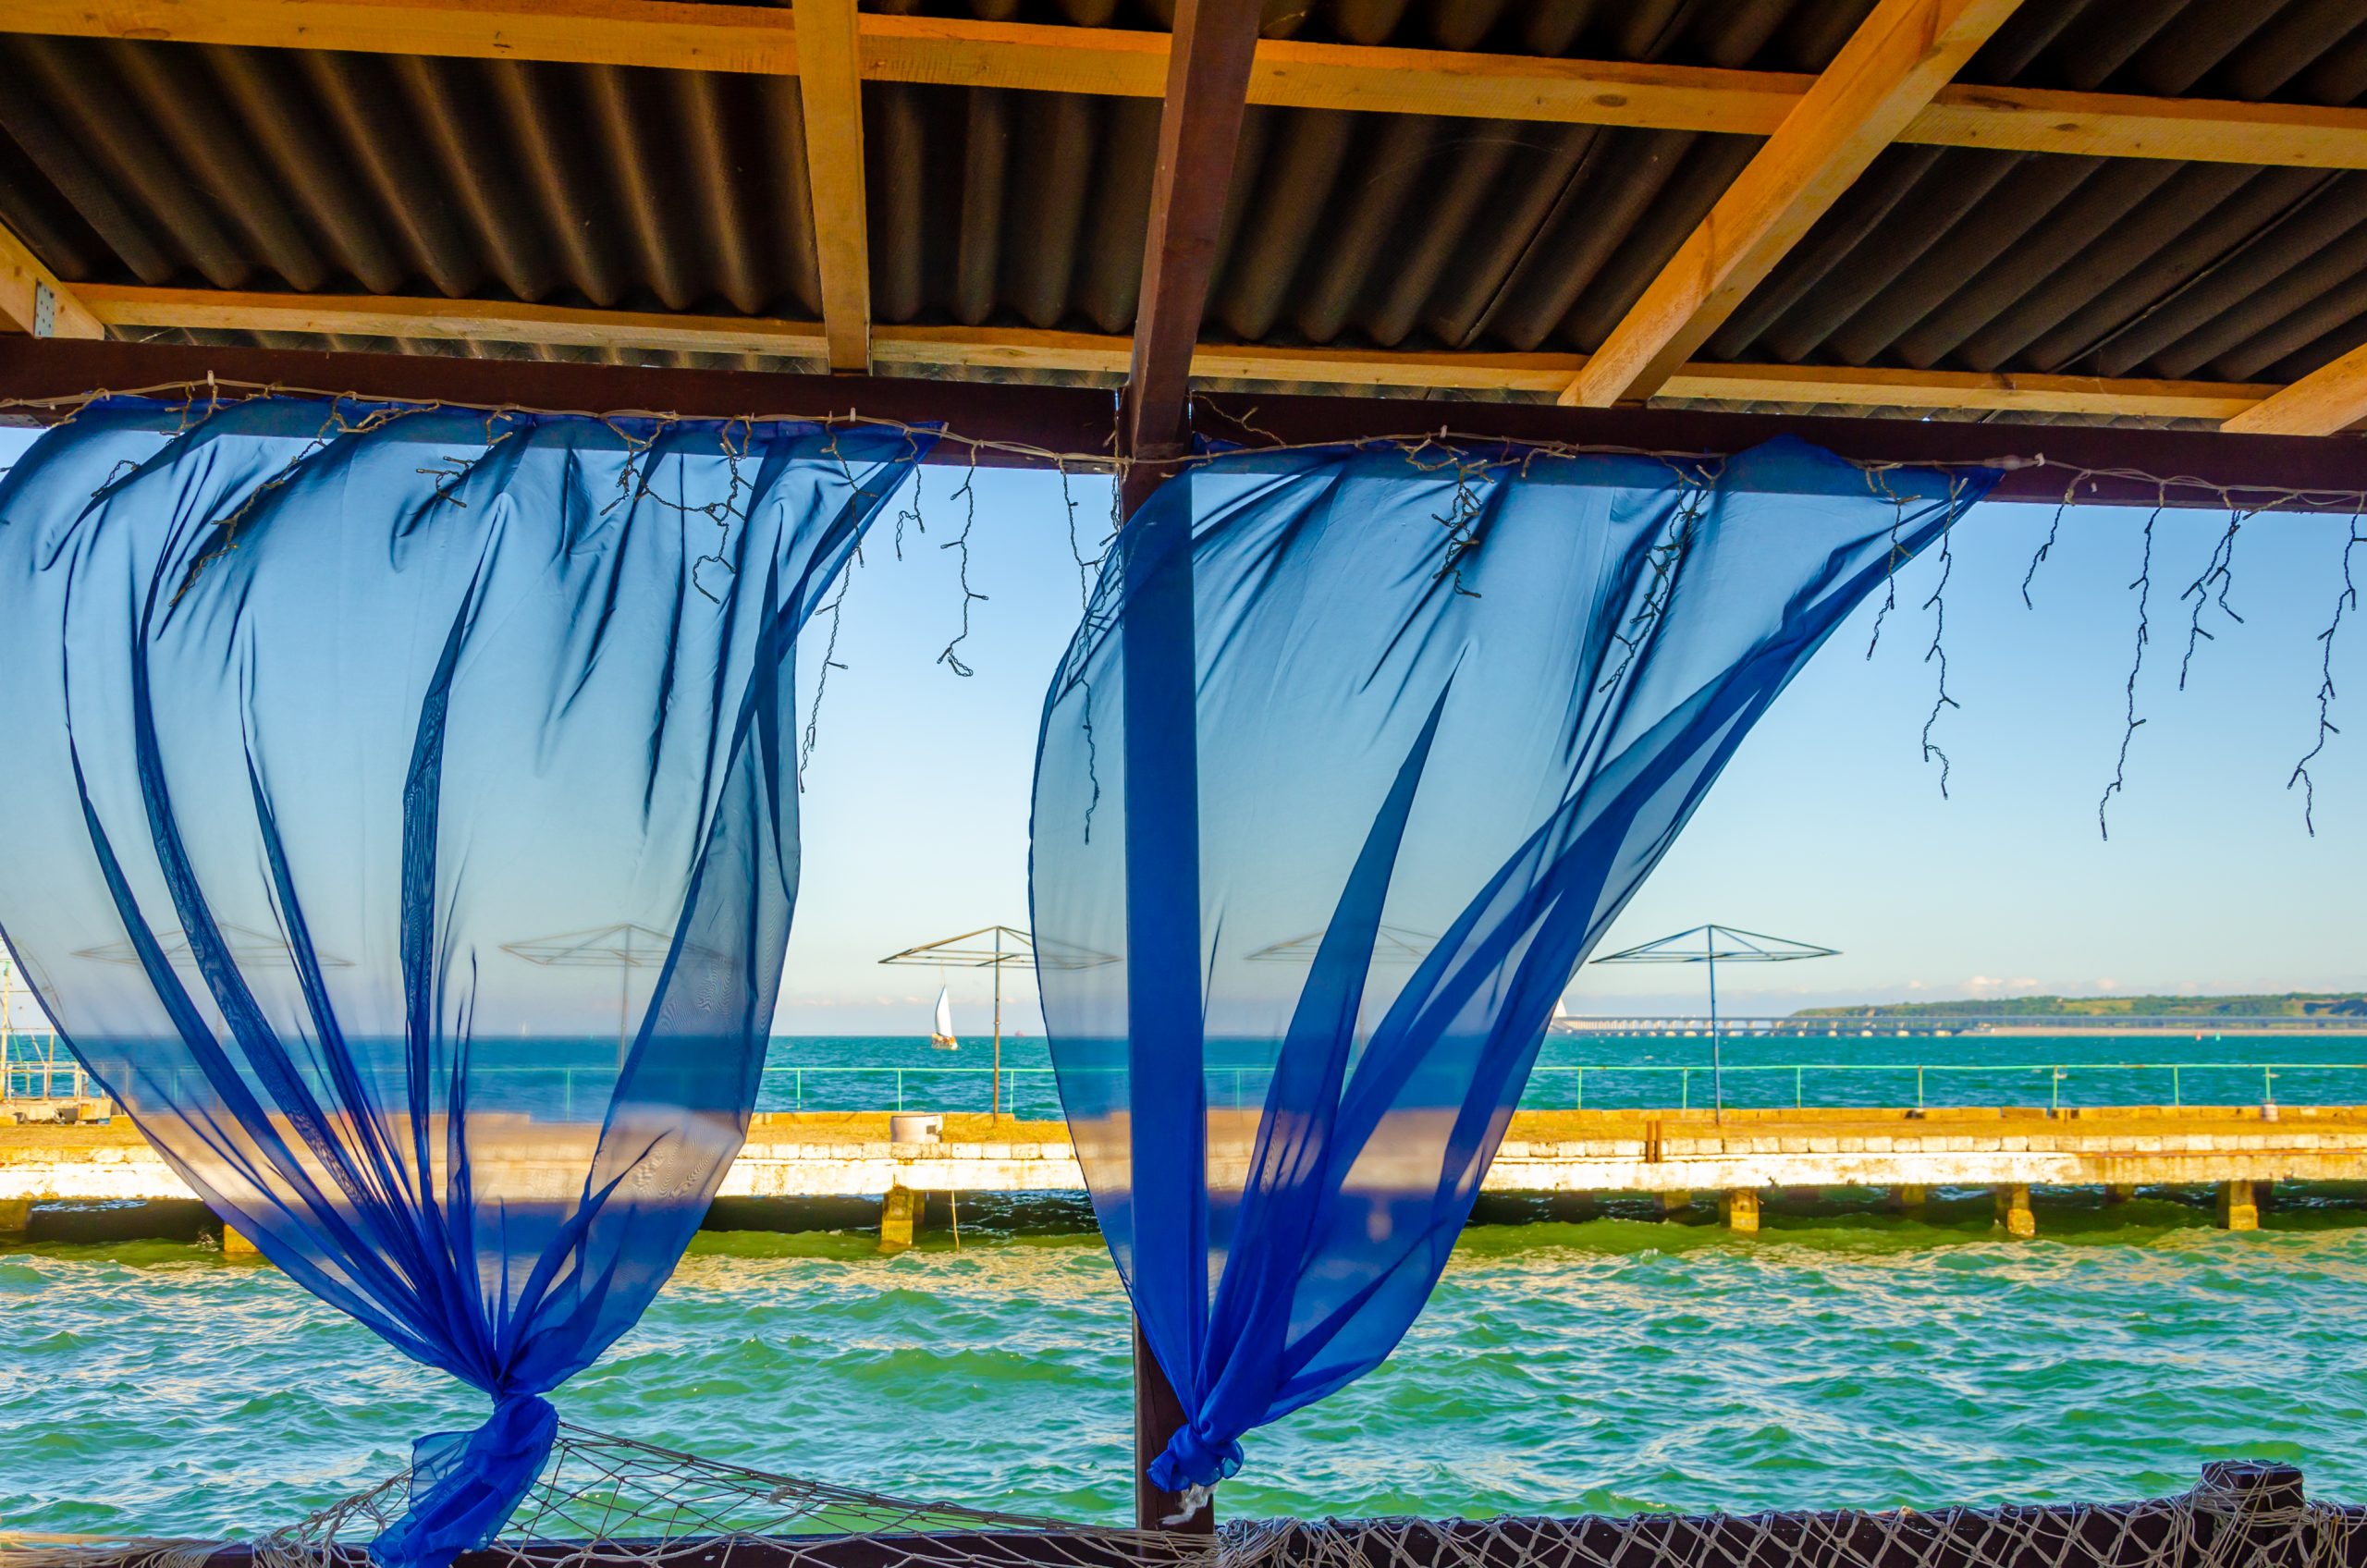 What to Do While in Port: Cozumel